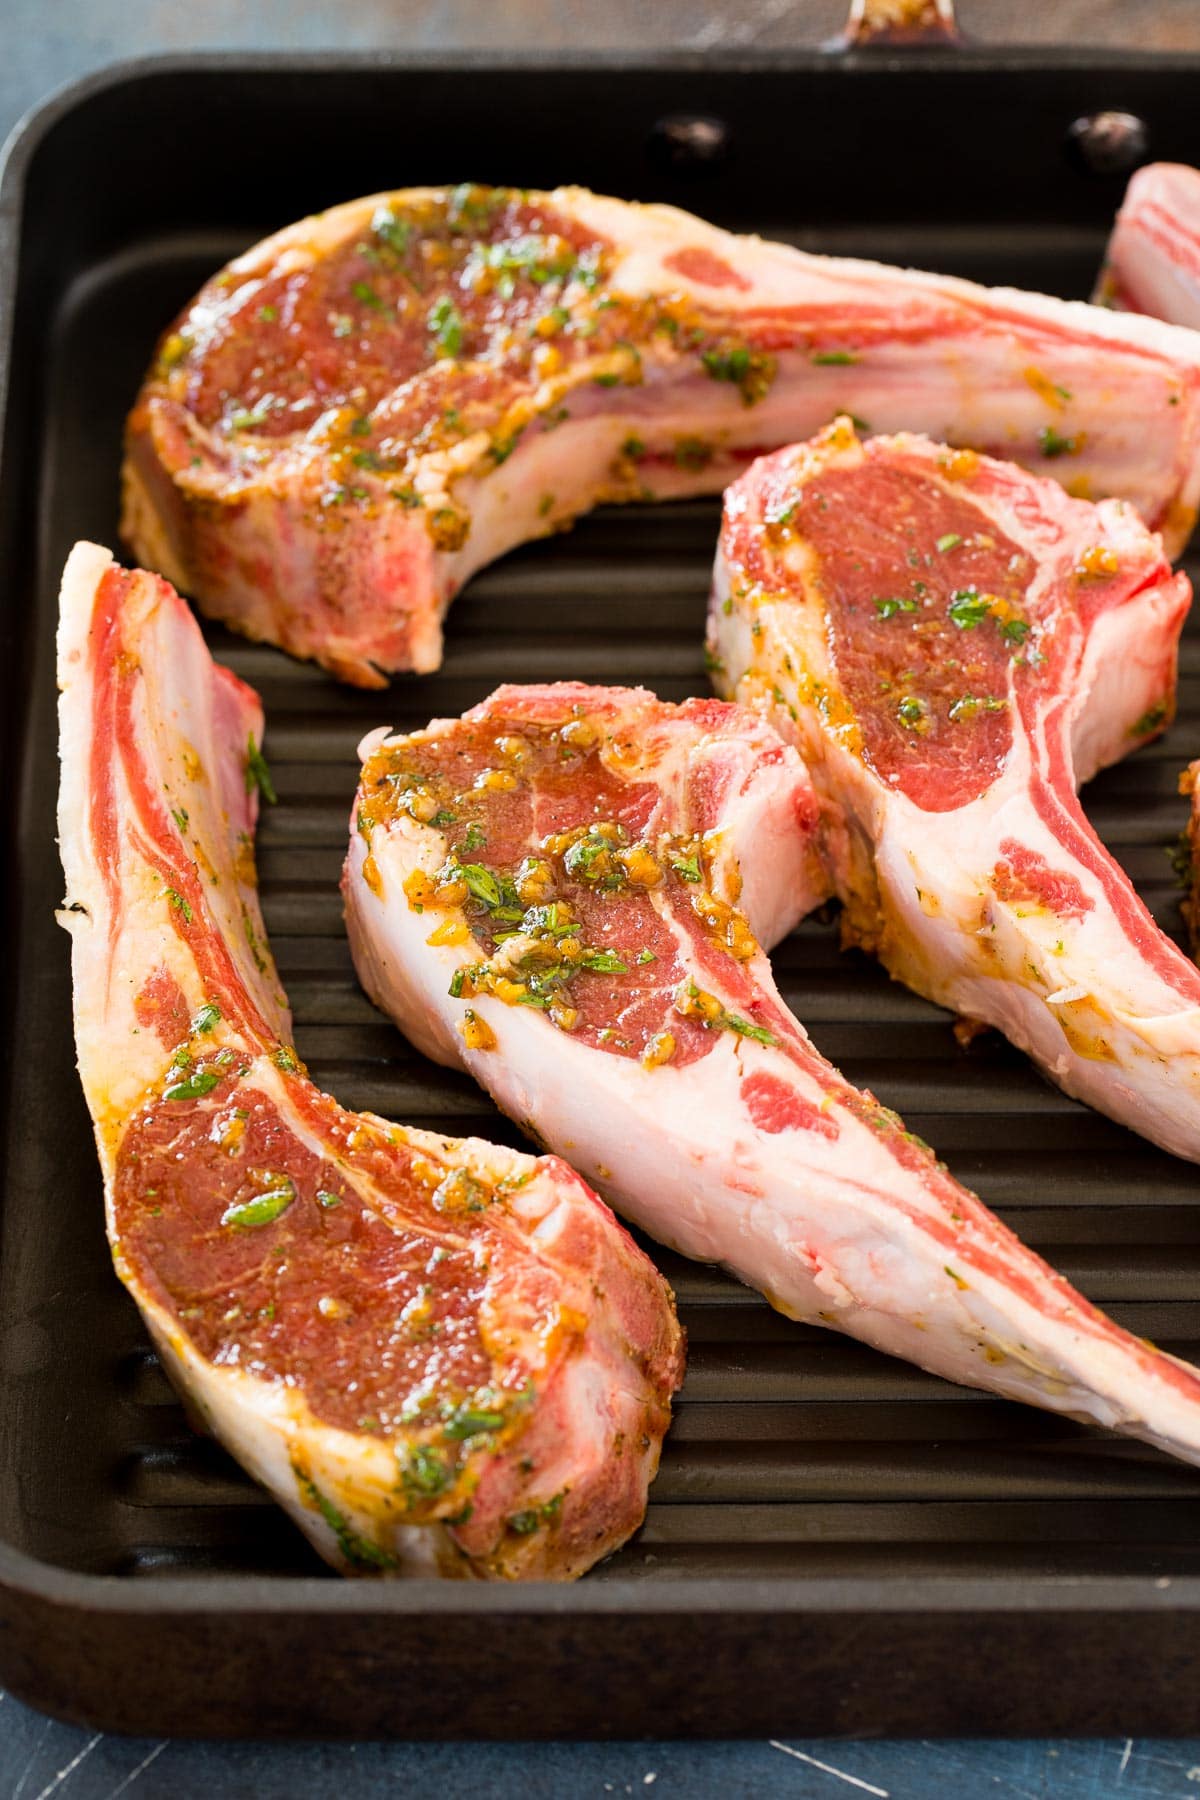 Lamb chops in marinade on a grill pan.